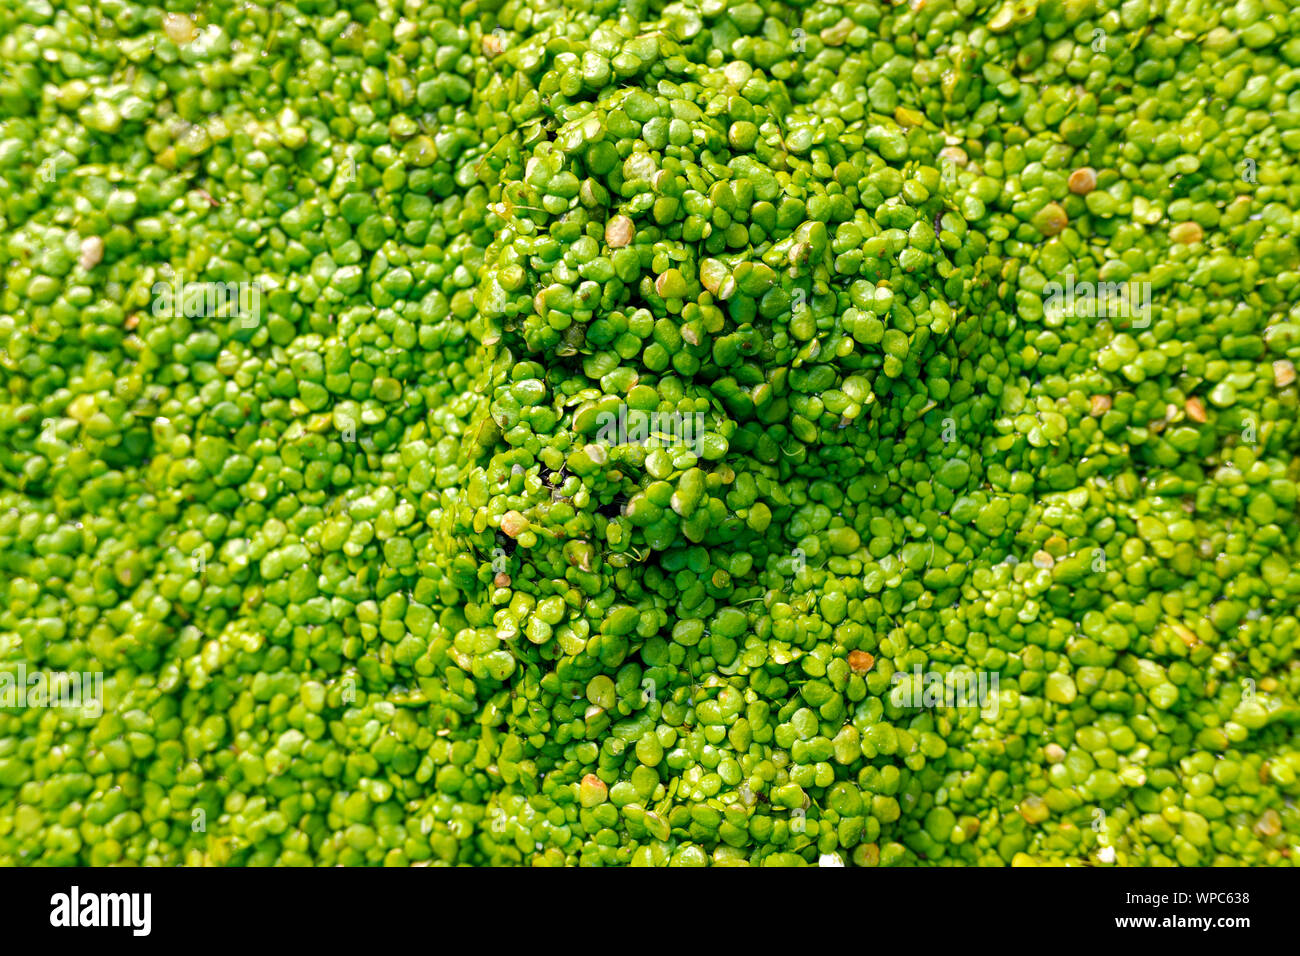 Macro of many green round leaves of aquatic plant, Lemnoideae, growing on the water of a stream. Stock Photo